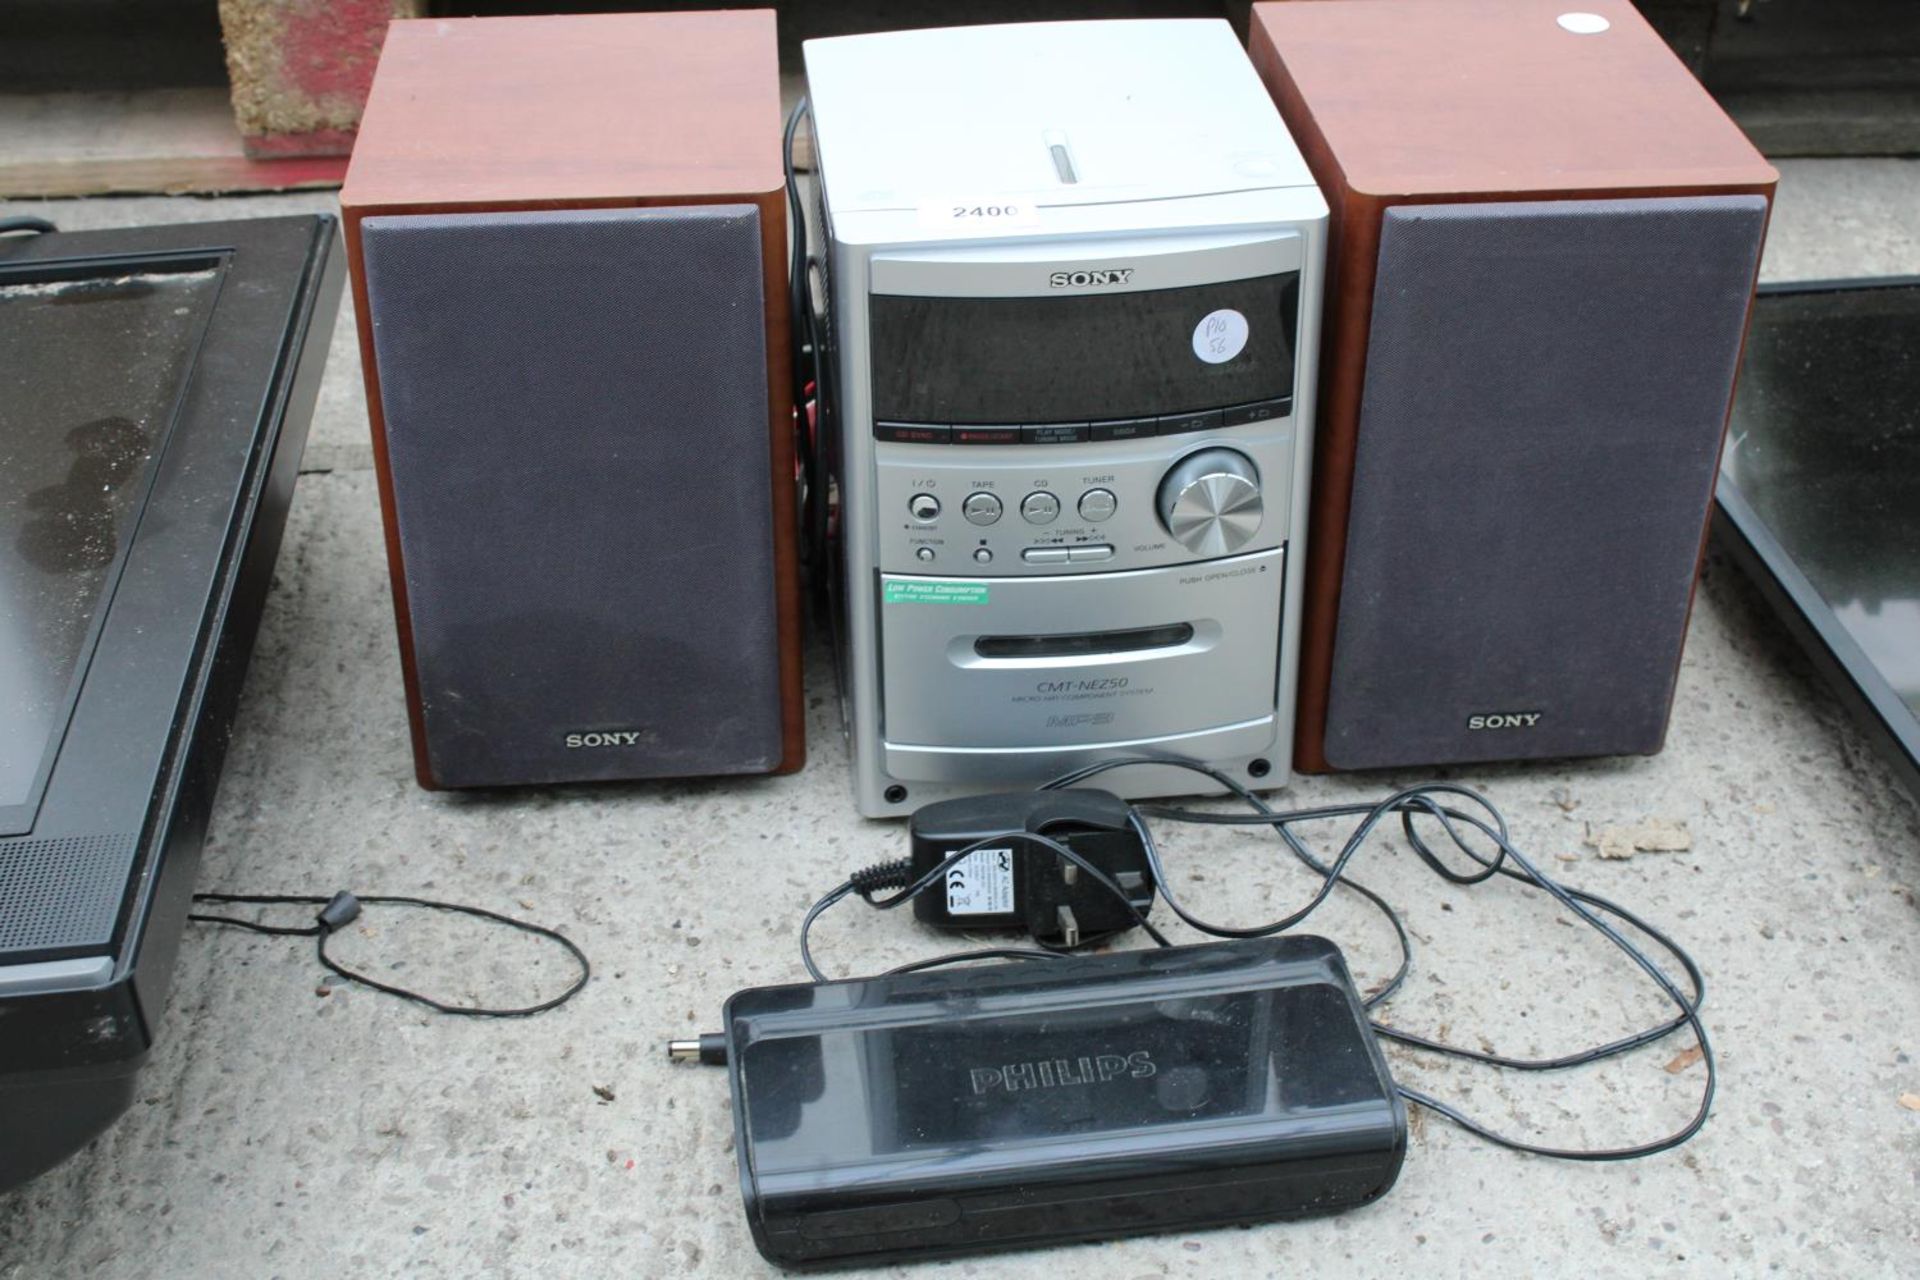 A SONY STEREO SYSTEM WITH TWO SPEAKERS - Image 2 of 2